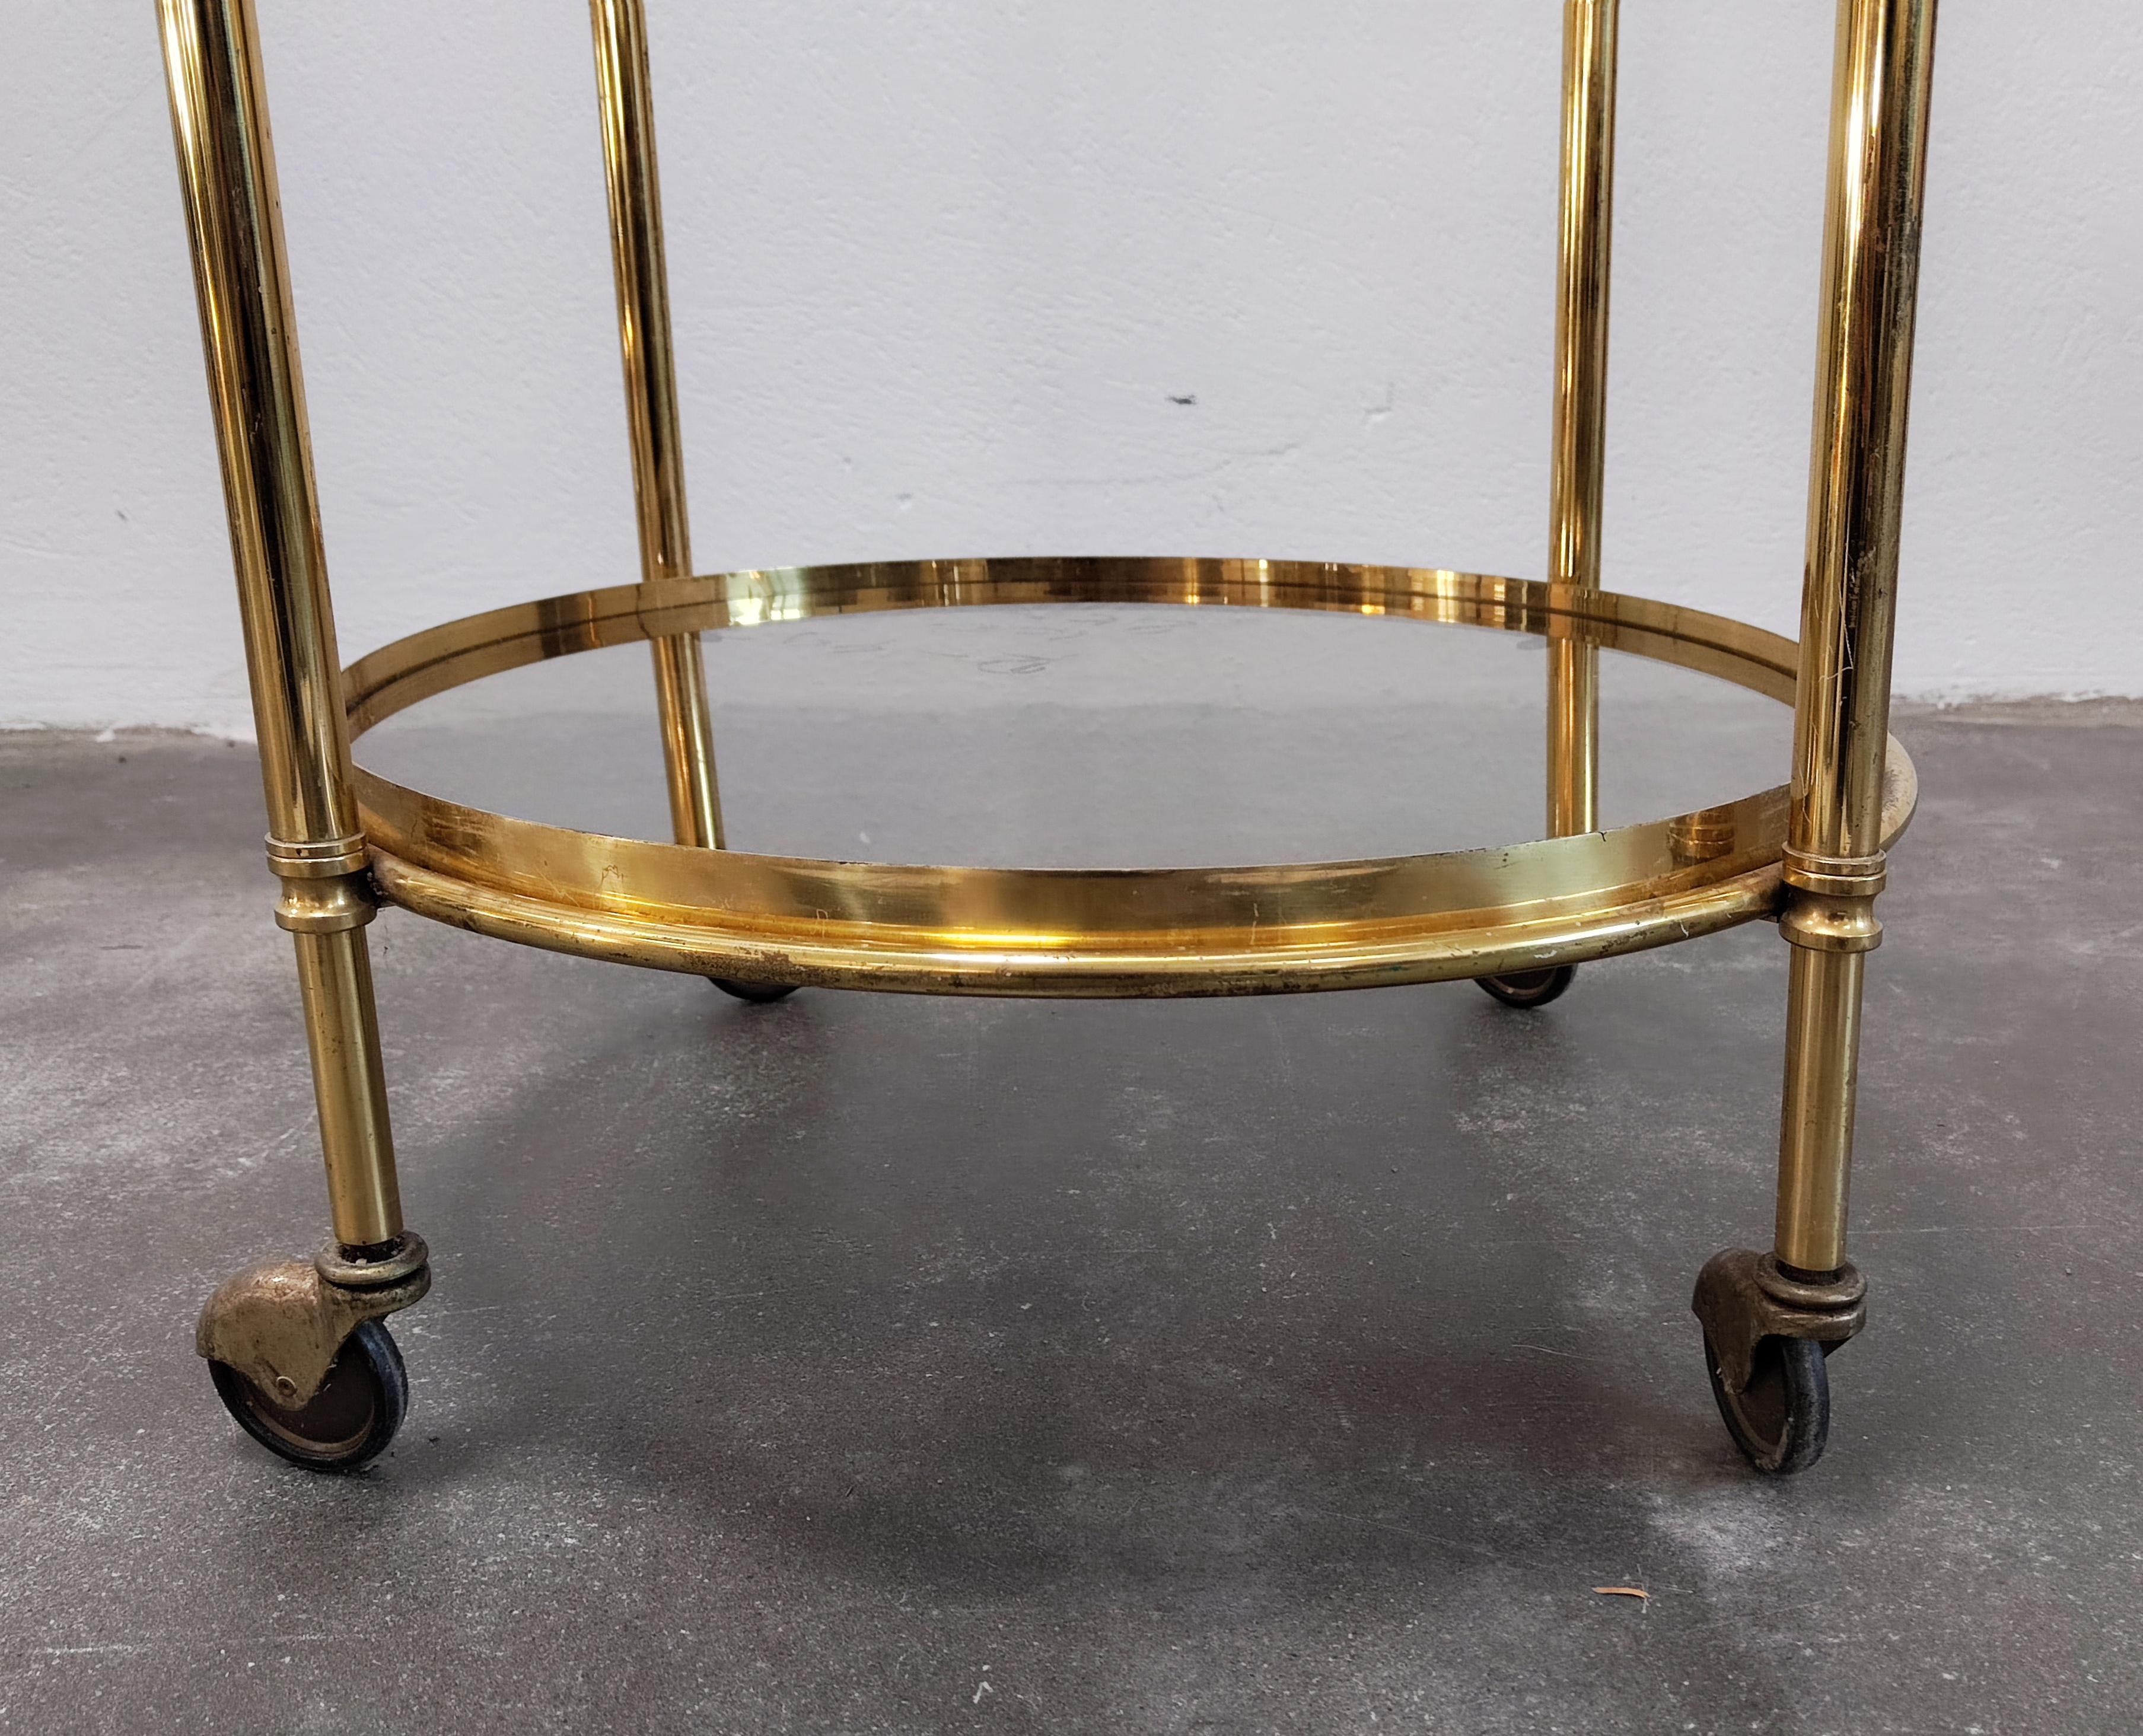 Hollywood Regency 2-Tier Bronze and Smoked Glass Bar Trolley, France, 1950s For Sale 2